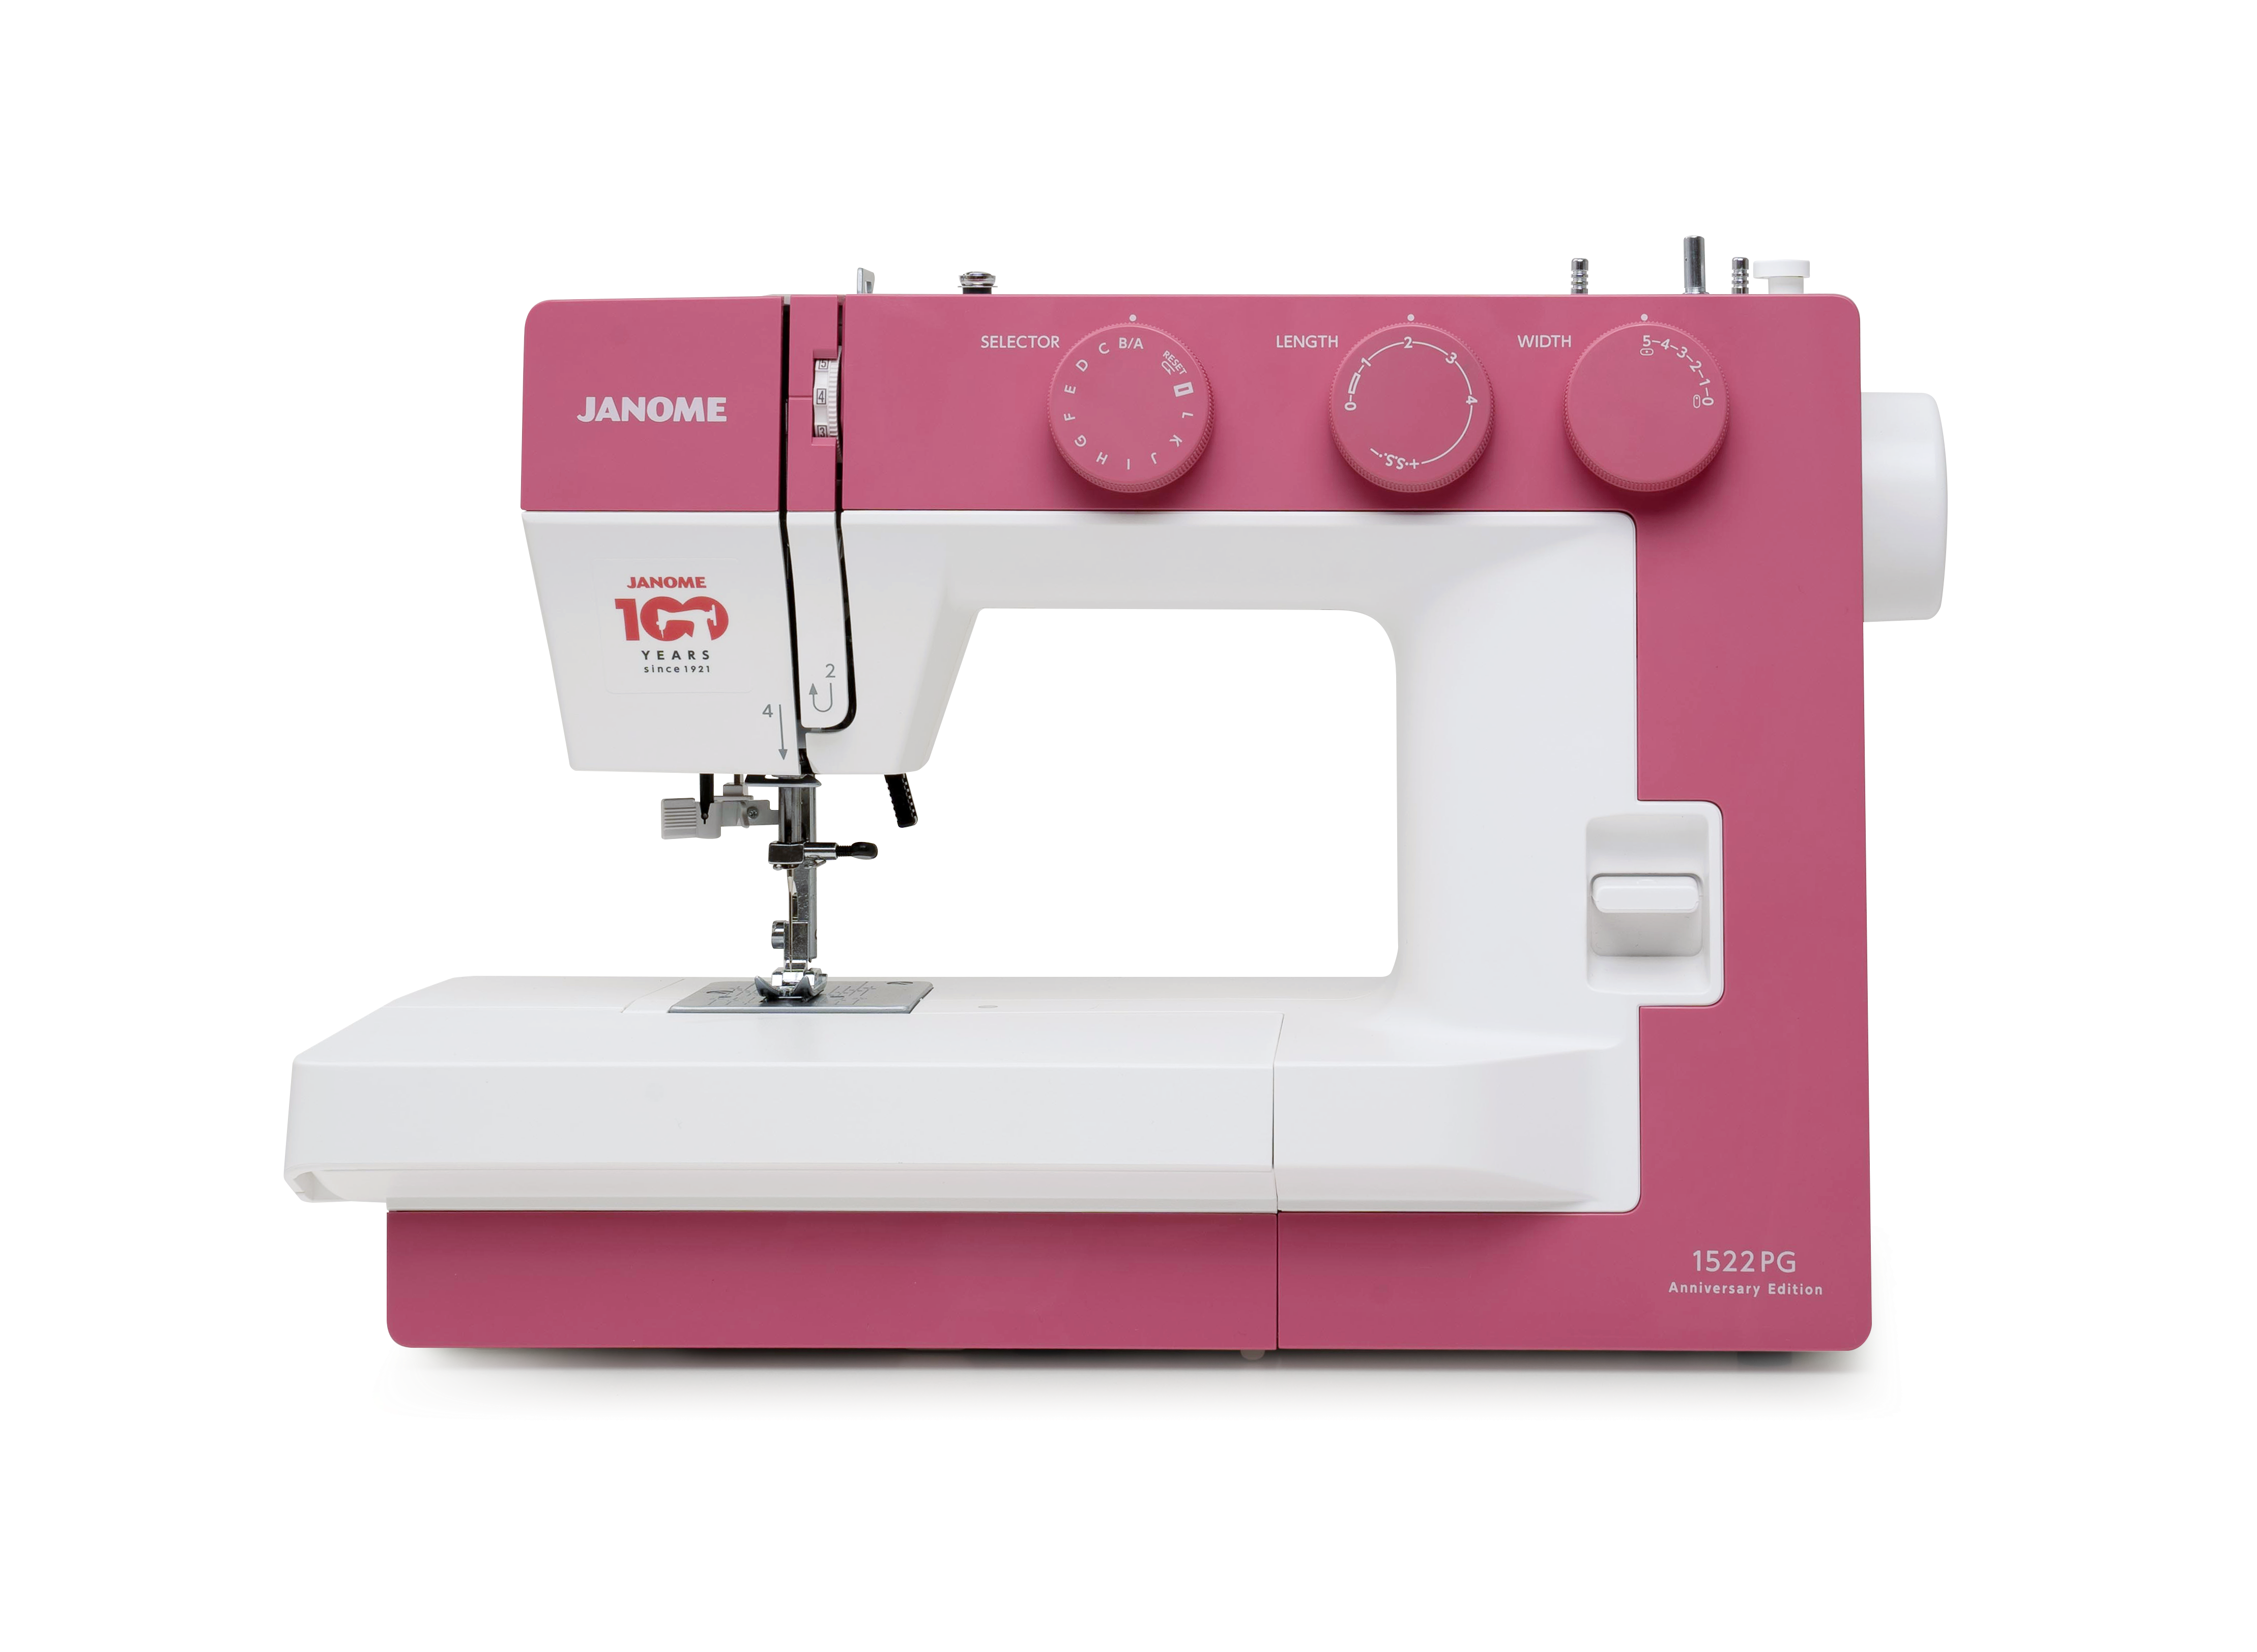 Janome 1522PG 100th Anniversary Edition Sewing Machine